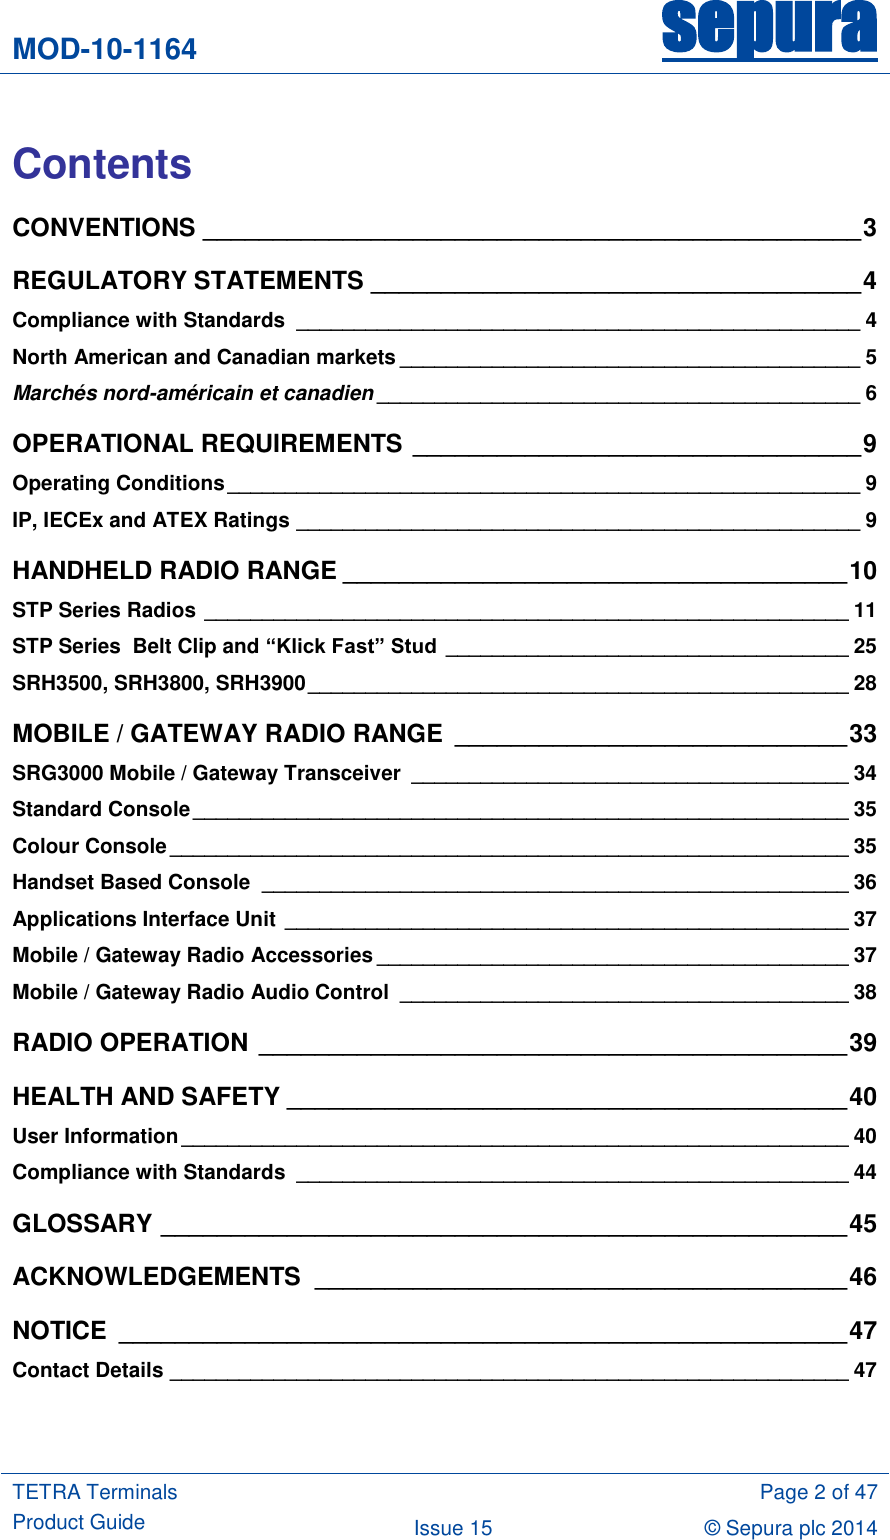 MOD-10-1164 sepura  TETRA Terminals Product Guide  Page 2 of 47 Issue 15 © Sepura plc 2014    Contents CONVENTIONS _______________________________________________ 3 REGULATORY STATEMENTS ___________________________________ 4 Compliance with Standards  _________________________________________________ 4 North American and Canadian markets ________________________________________ 5 Marchés nord-américain et canadien __________________________________________ 6 OPERATIONAL REQUIREMENTS ________________________________ 9 Operating Conditions _______________________________________________________ 9 IP, IECEx and ATEX Ratings _________________________________________________ 9 HANDHELD RADIO RANGE ____________________________________ 10 STP Series Radios ________________________________________________________ 11 STP Series  Belt Clip and “Klick Fast” Stud ___________________________________ 25 SRH3500, SRH3800, SRH3900 _______________________________________________ 28 MOBILE / GATEWAY RADIO RANGE  ____________________________ 33 SRG3000 Mobile / Gateway Transceiver  ______________________________________ 34 Standard Console _________________________________________________________ 35 Colour Console ___________________________________________________________ 35 Handset Based Console  ___________________________________________________ 36 Applications Interface Unit _________________________________________________ 37 Mobile / Gateway Radio Accessories _________________________________________ 37 Mobile / Gateway Radio Audio Control  _______________________________________ 38 RADIO OPERATION __________________________________________ 39 HEALTH AND SAFETY ________________________________________ 40 User Information __________________________________________________________ 40 Compliance with Standards  ________________________________________________ 44 GLOSSARY _________________________________________________ 45 ACKNOWLEDGEMENTS  ______________________________________ 46 NOTICE  ____________________________________________________ 47 Contact Details ___________________________________________________________ 47  